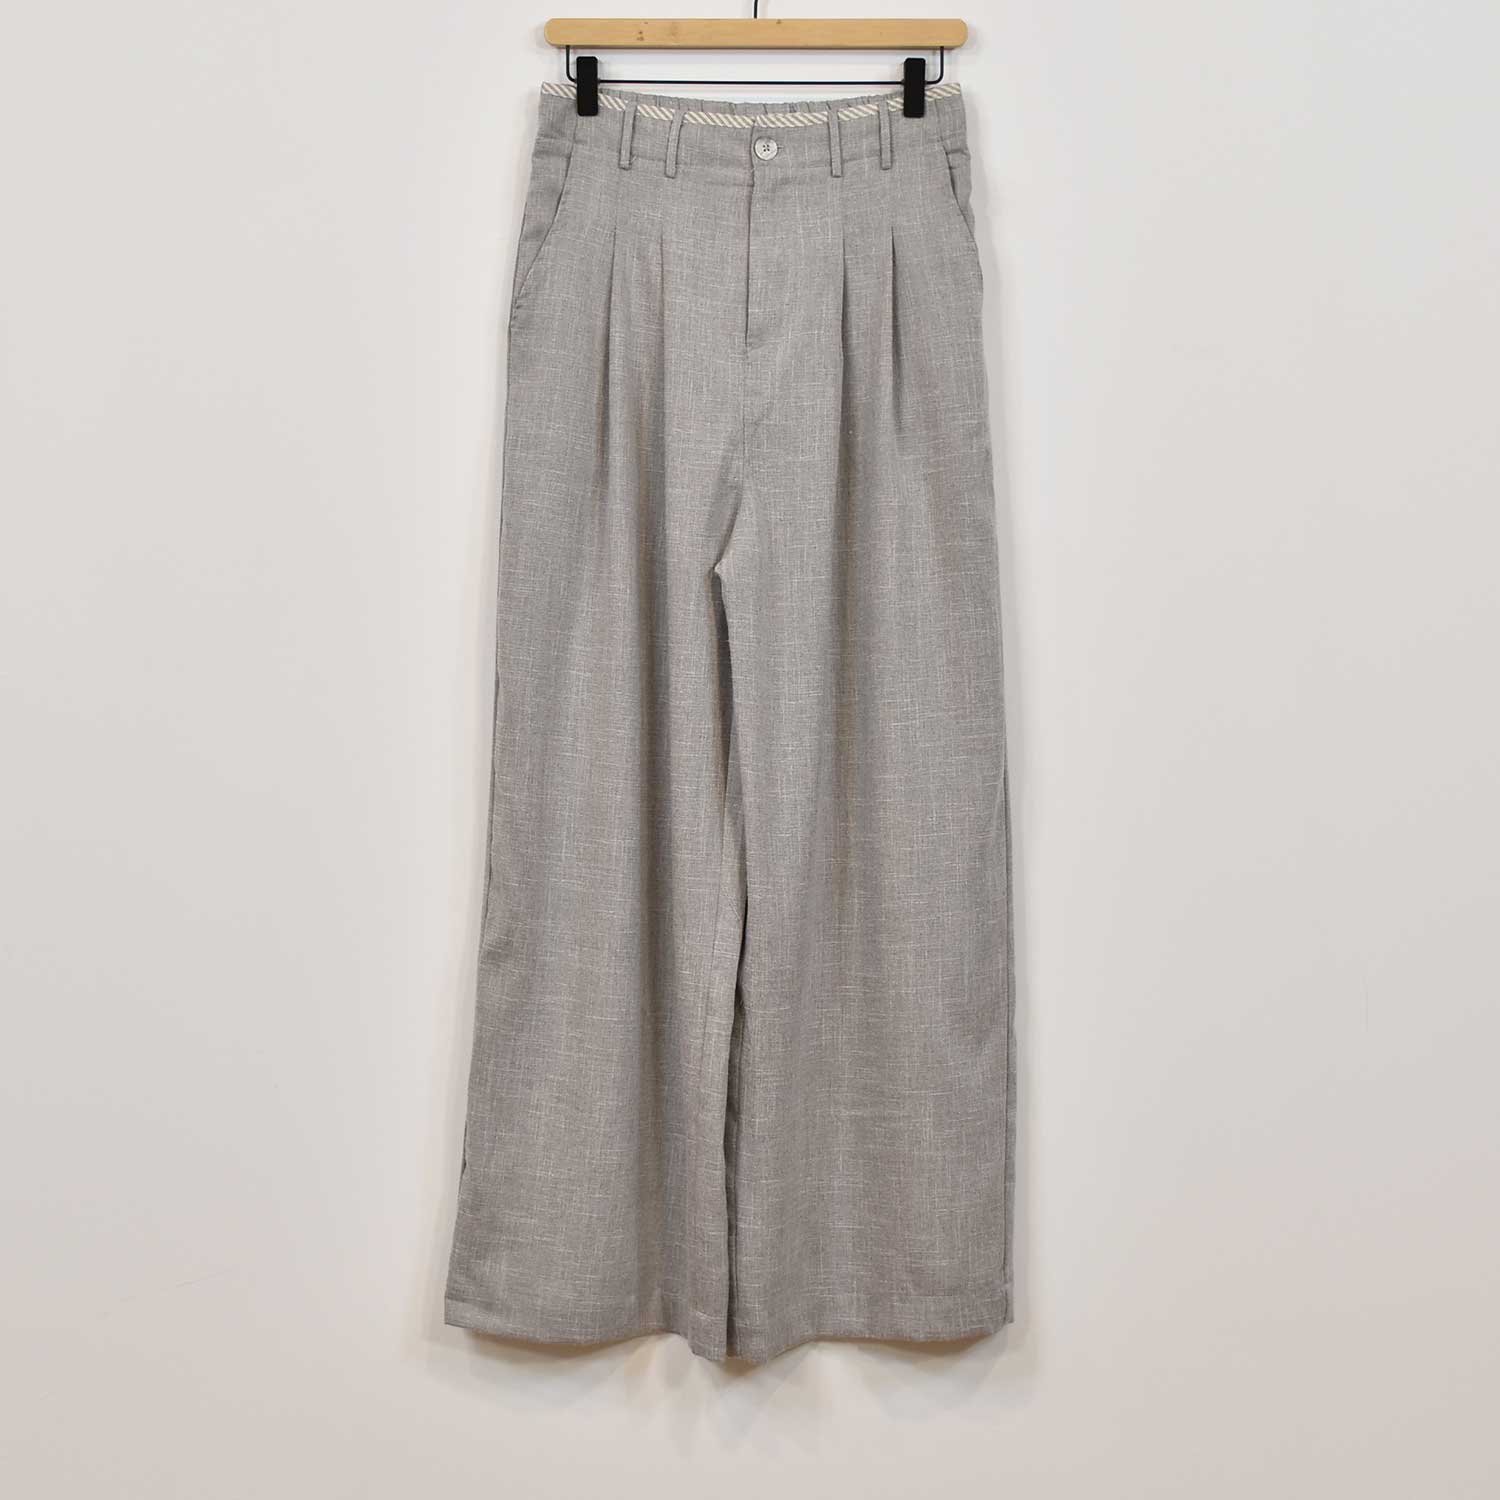 Grey wide pants with darts